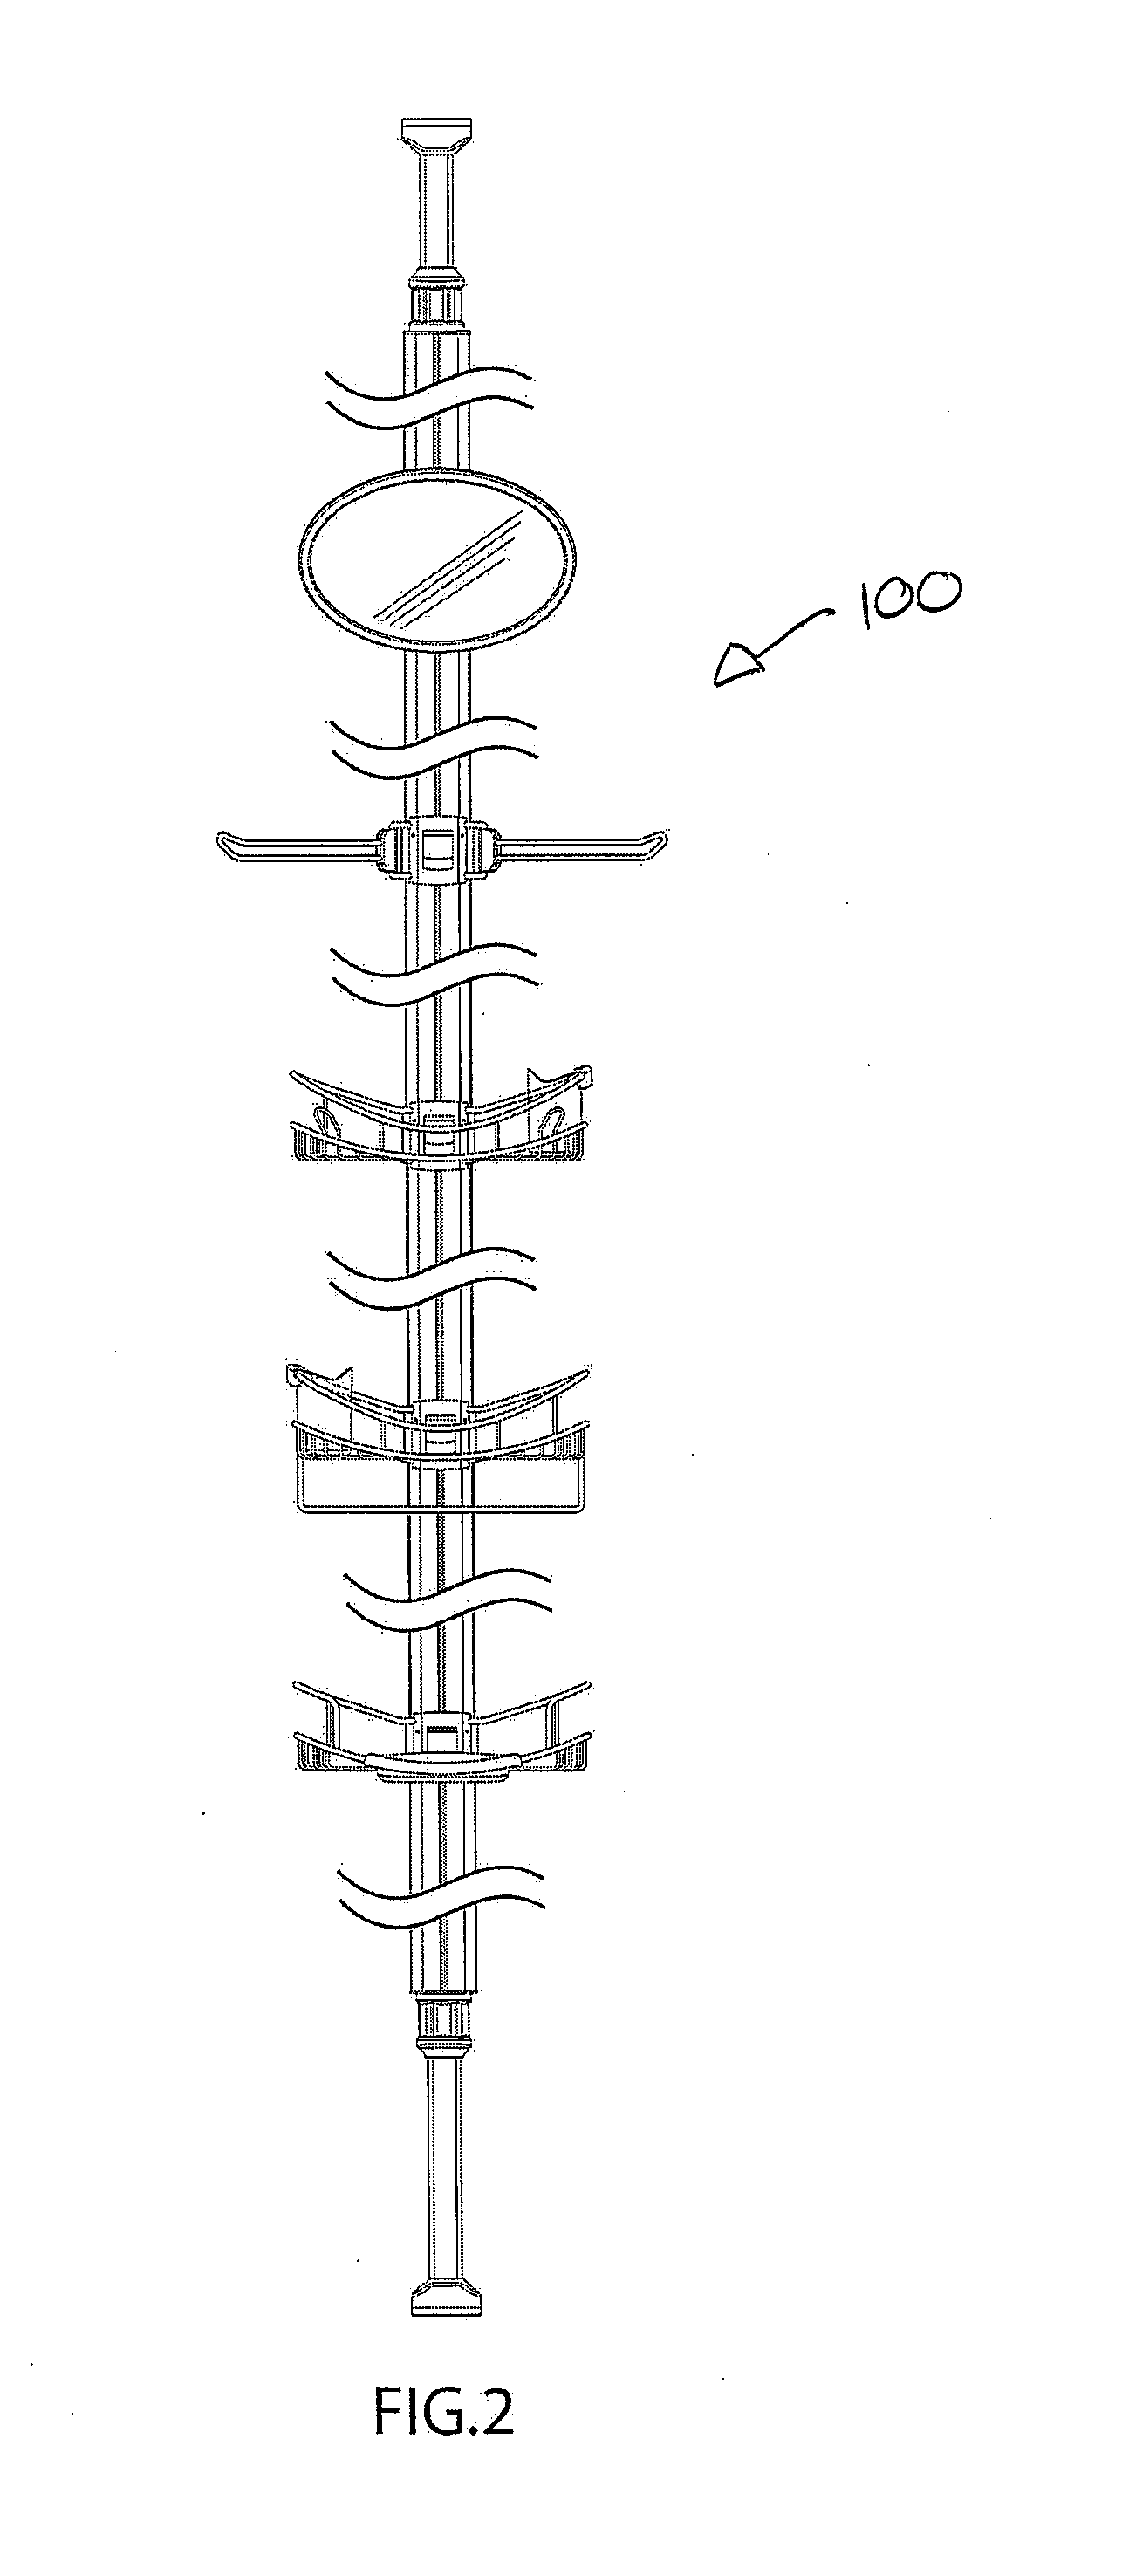 Vertically Adjustable Shower Caddy and Method for Tensioning Same